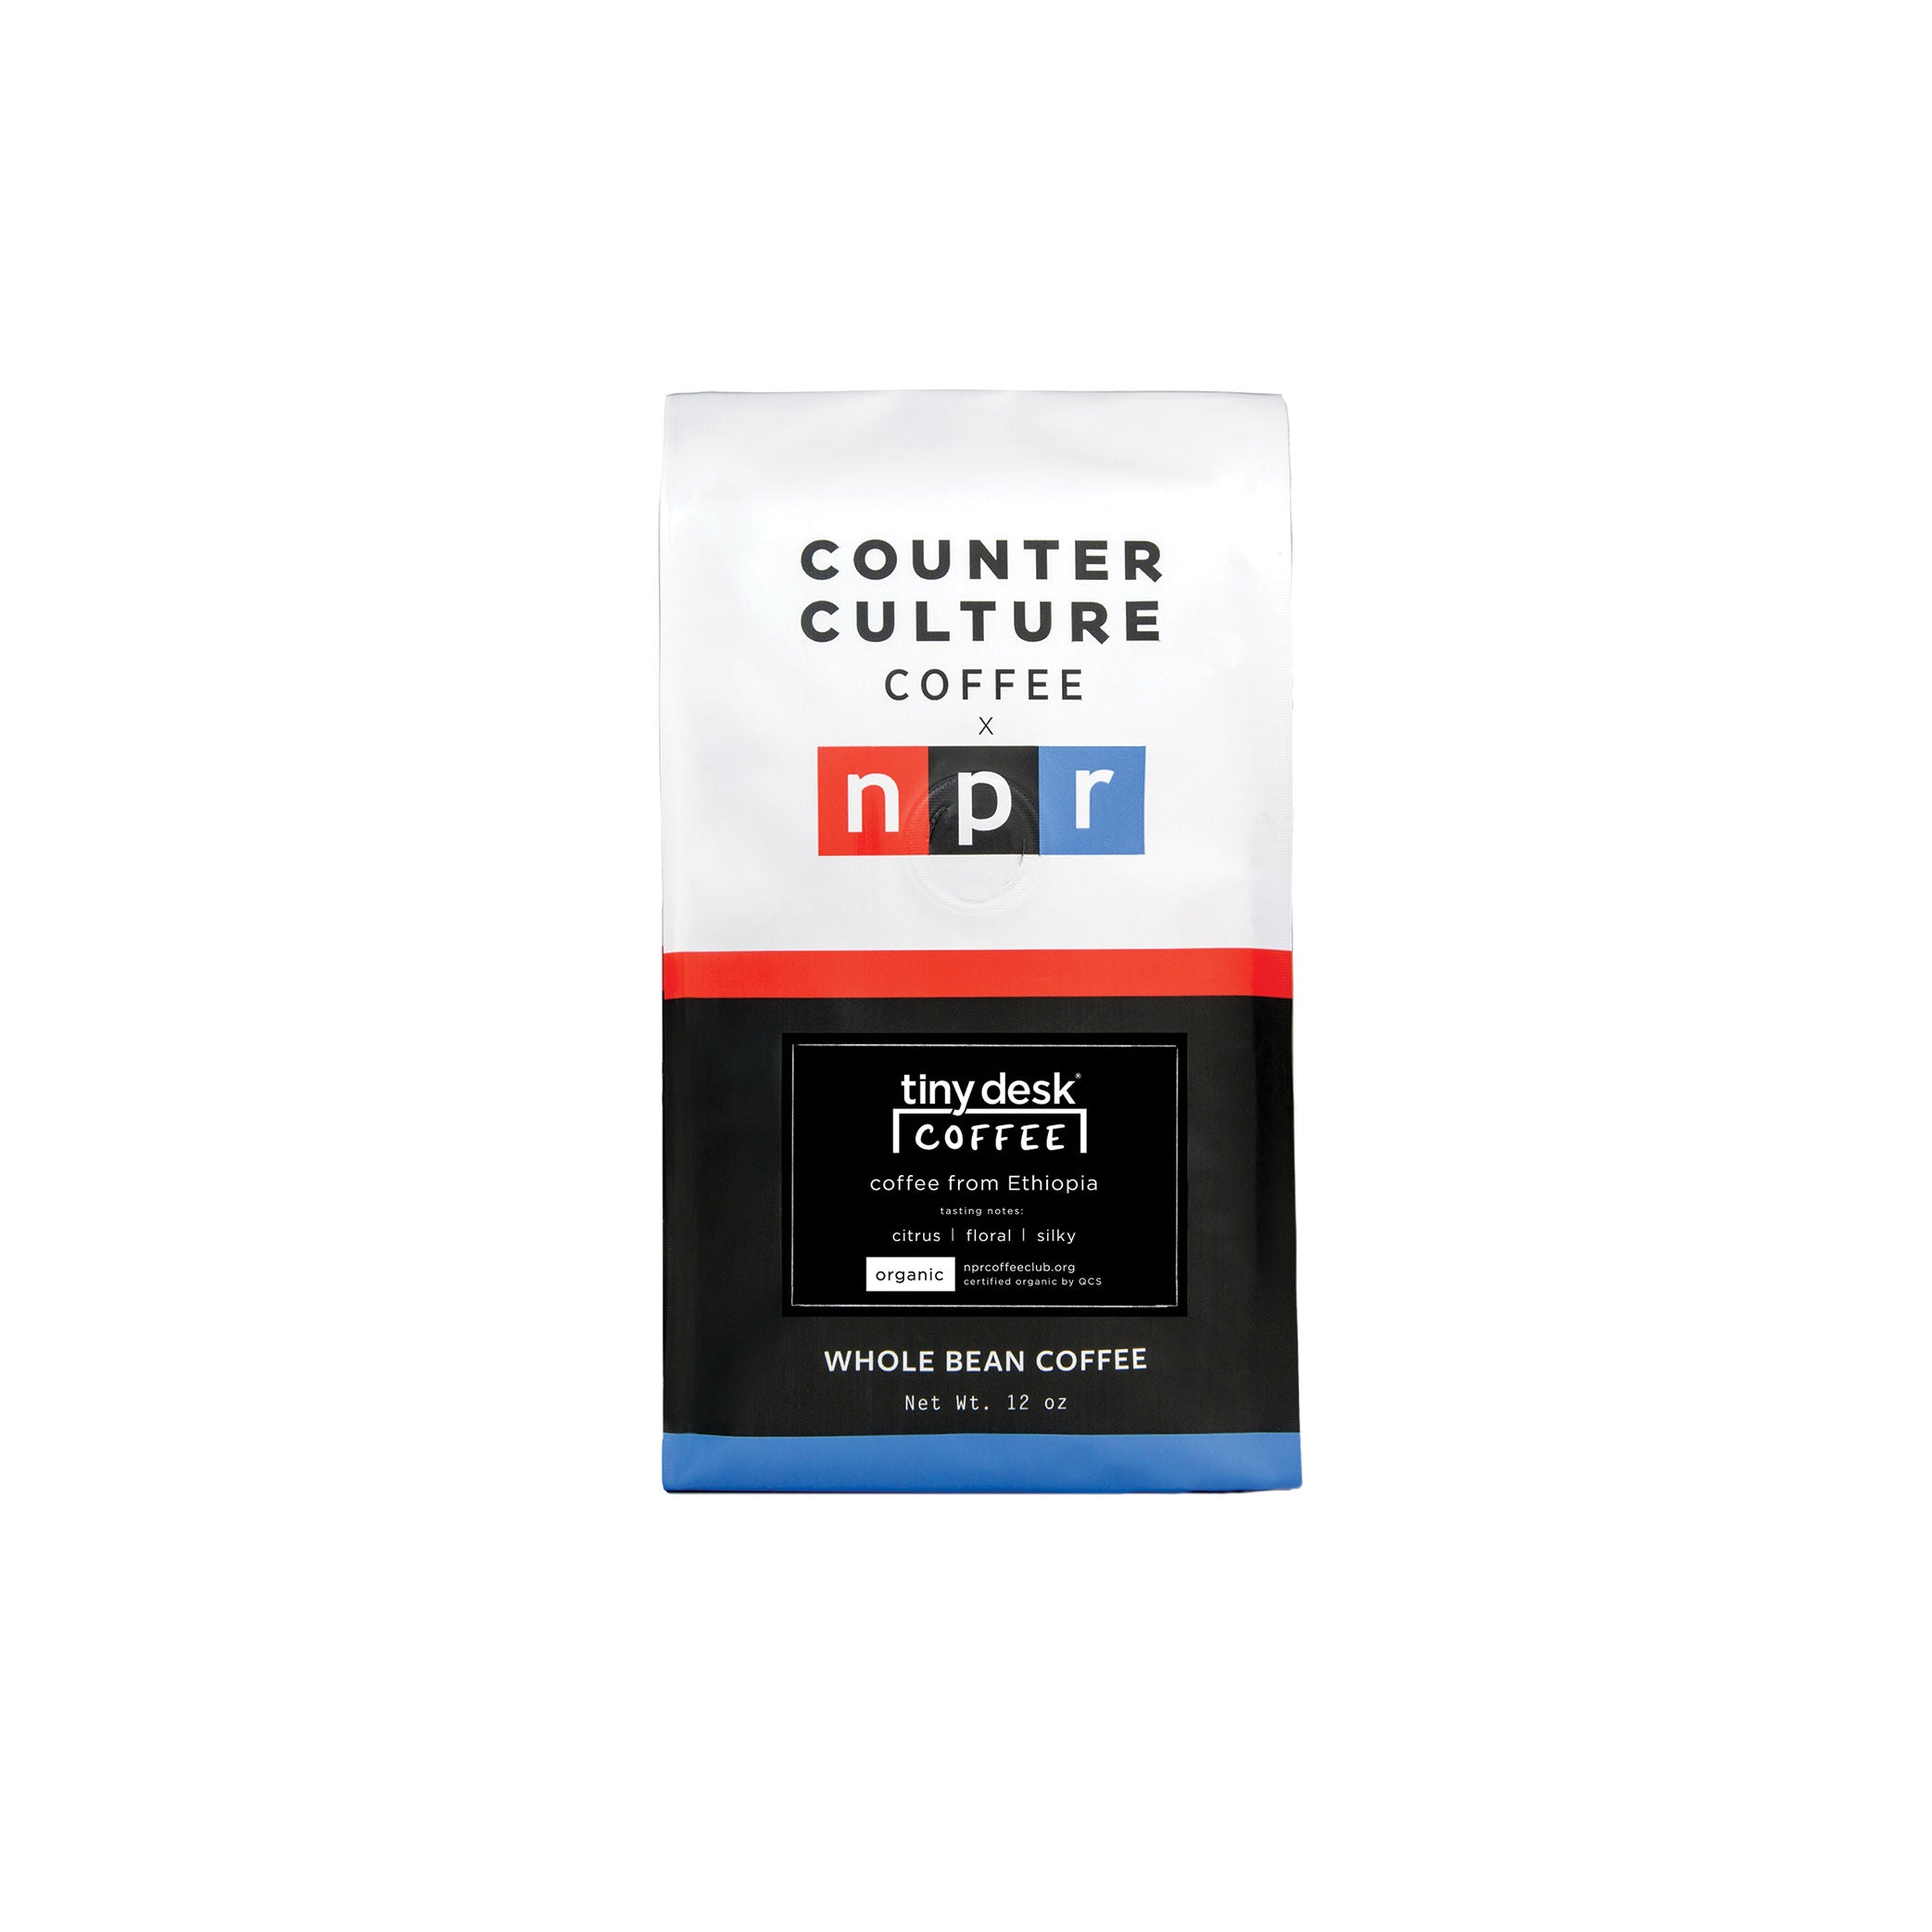 Counter Culture Coffee Forty Six Blend Coffee 